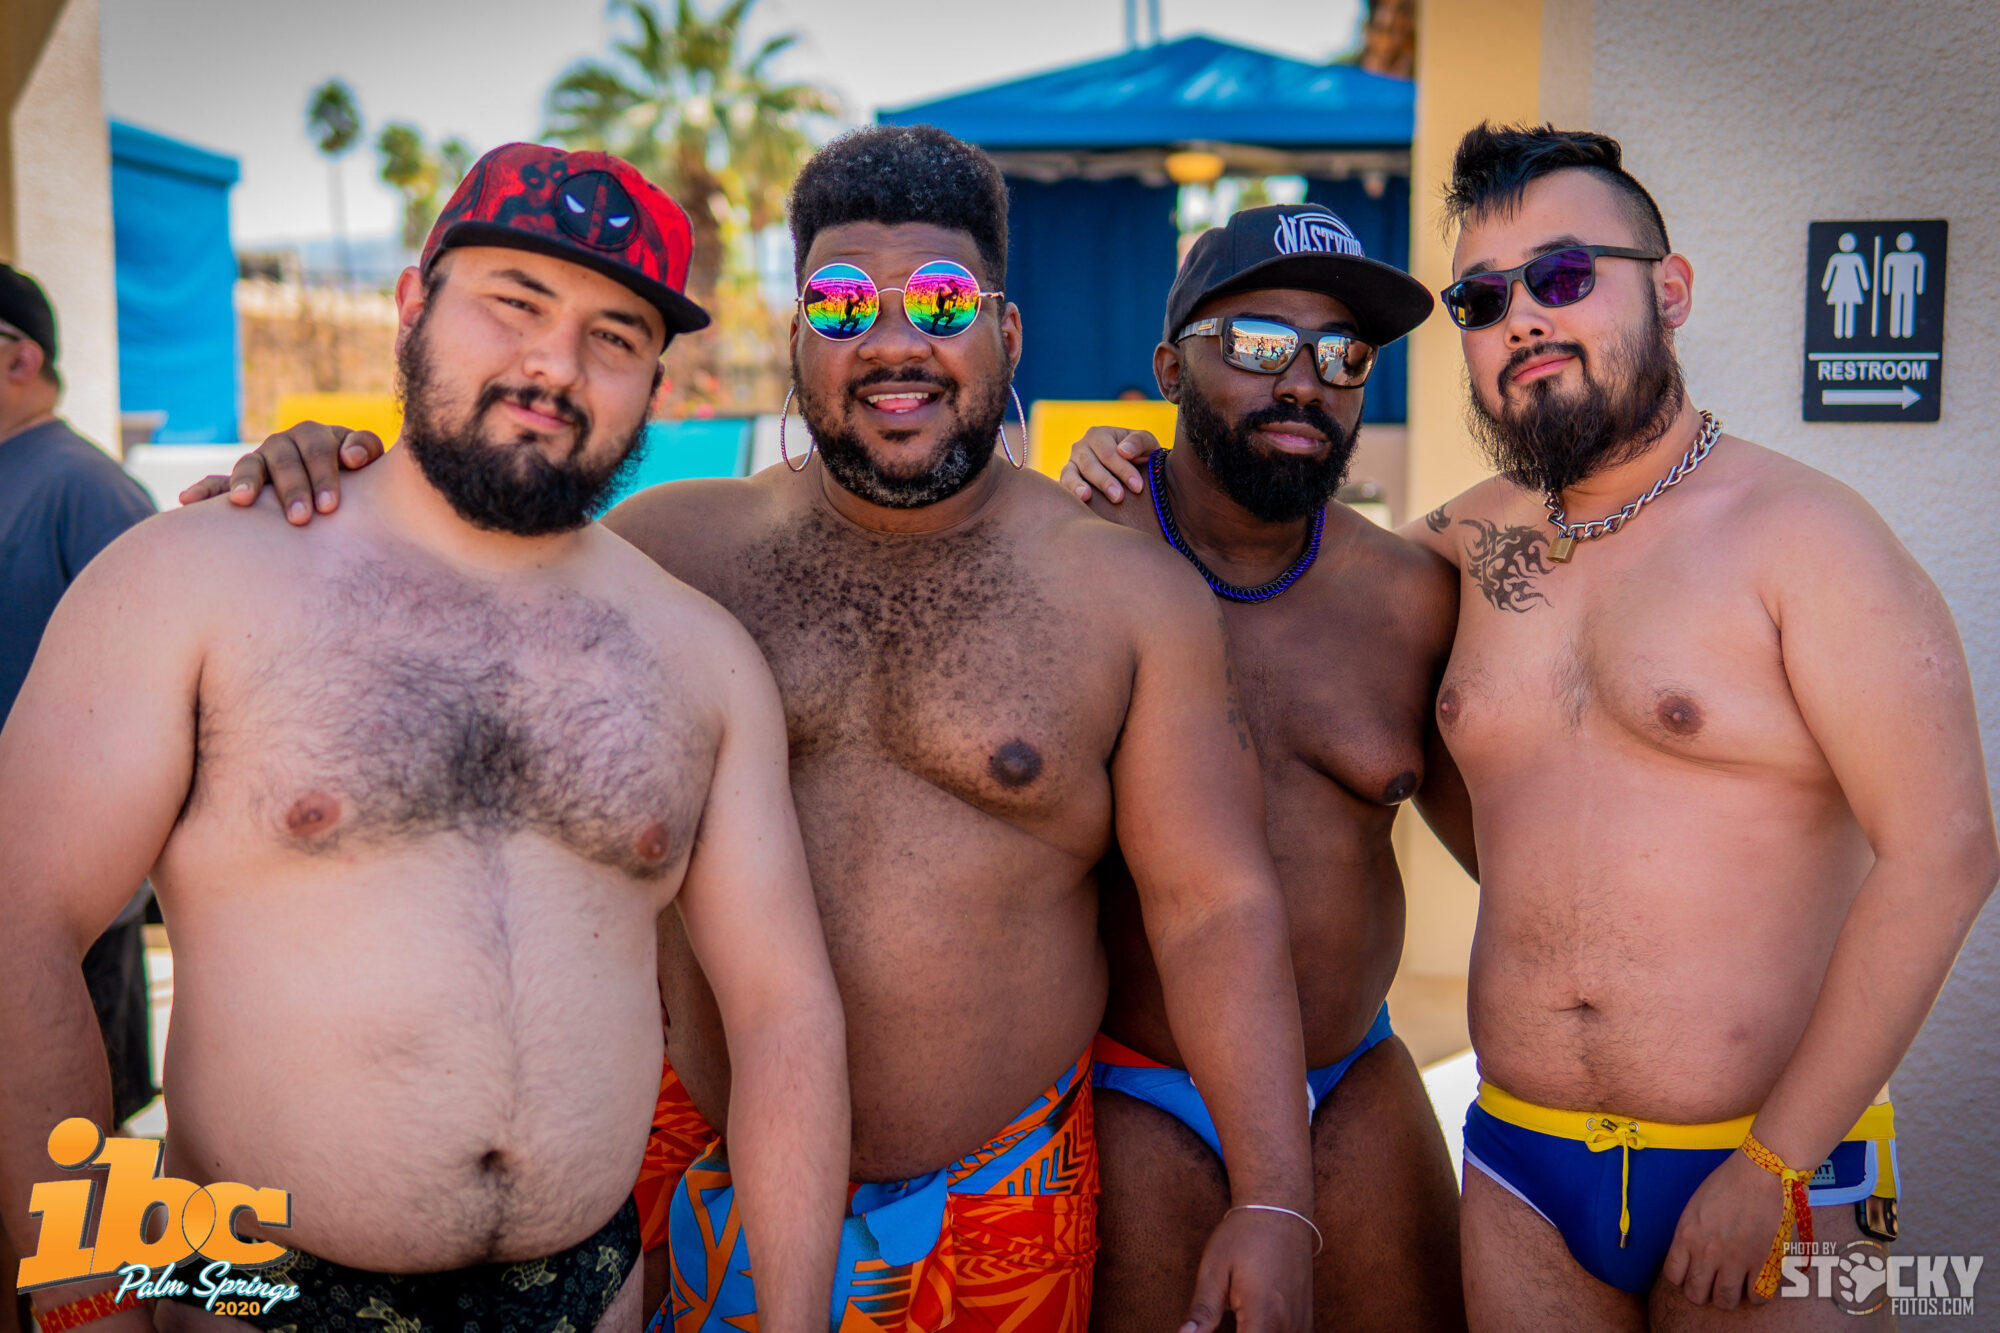 Headed to IBC? Check out this Palm Springs Travel Guide Bear World